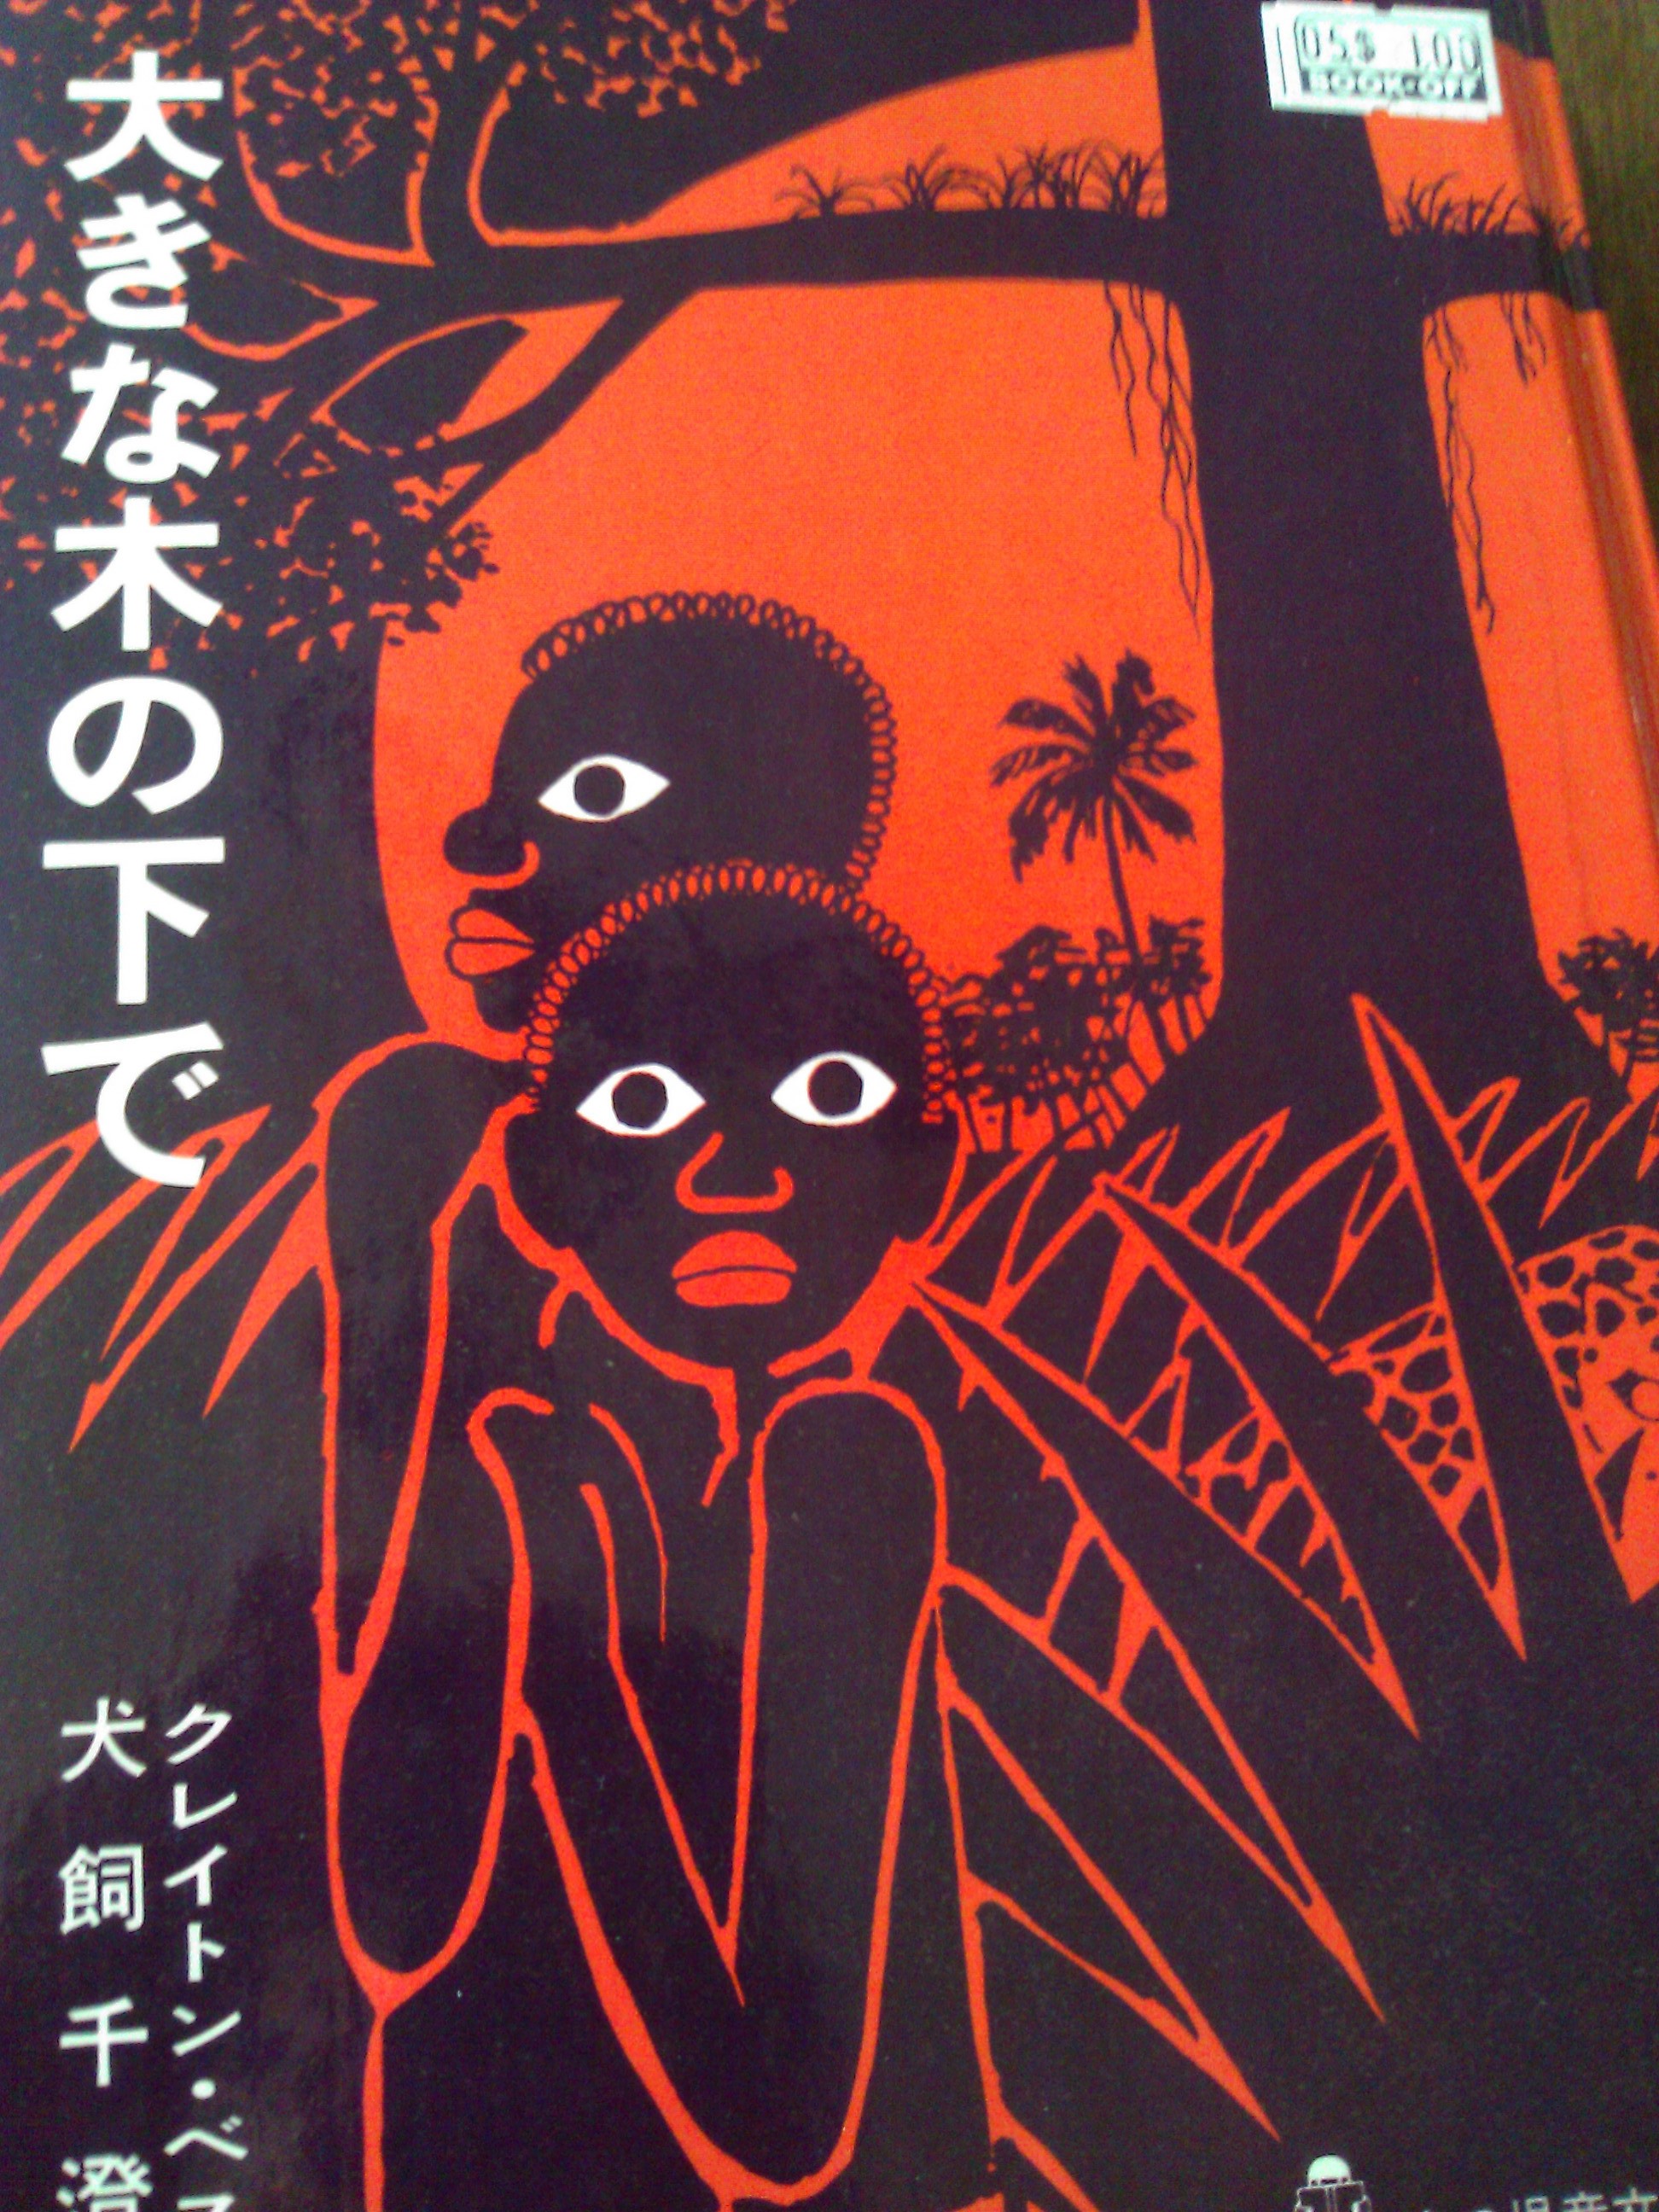 Bookcover - Japanese edition